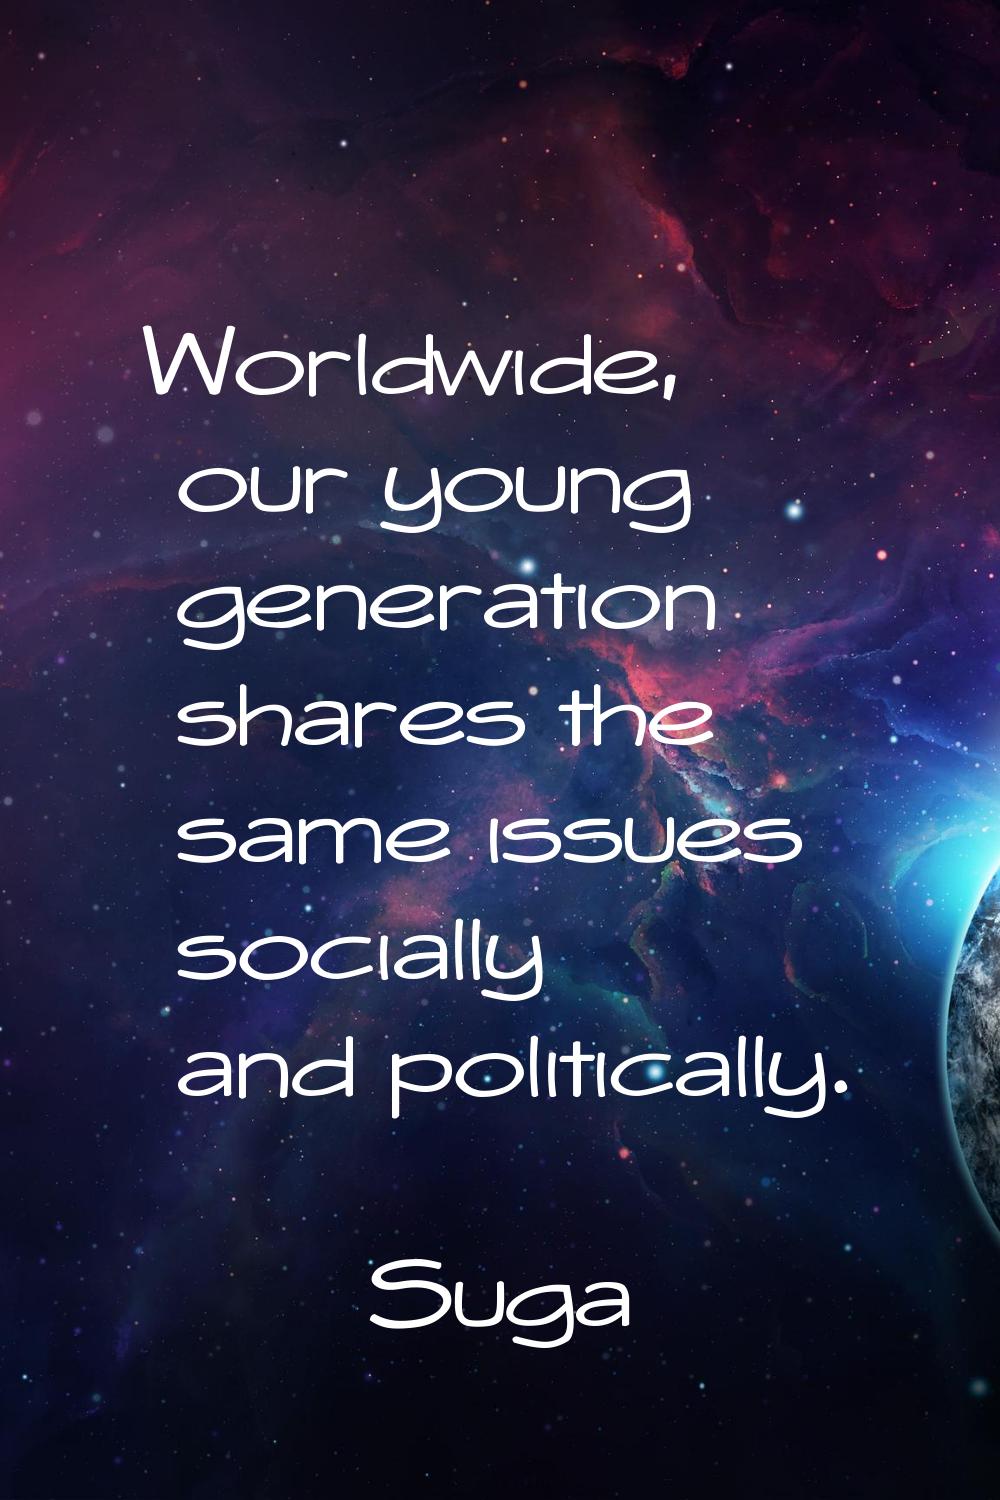 Worldwide, our young generation shares the same issues socially and politically.